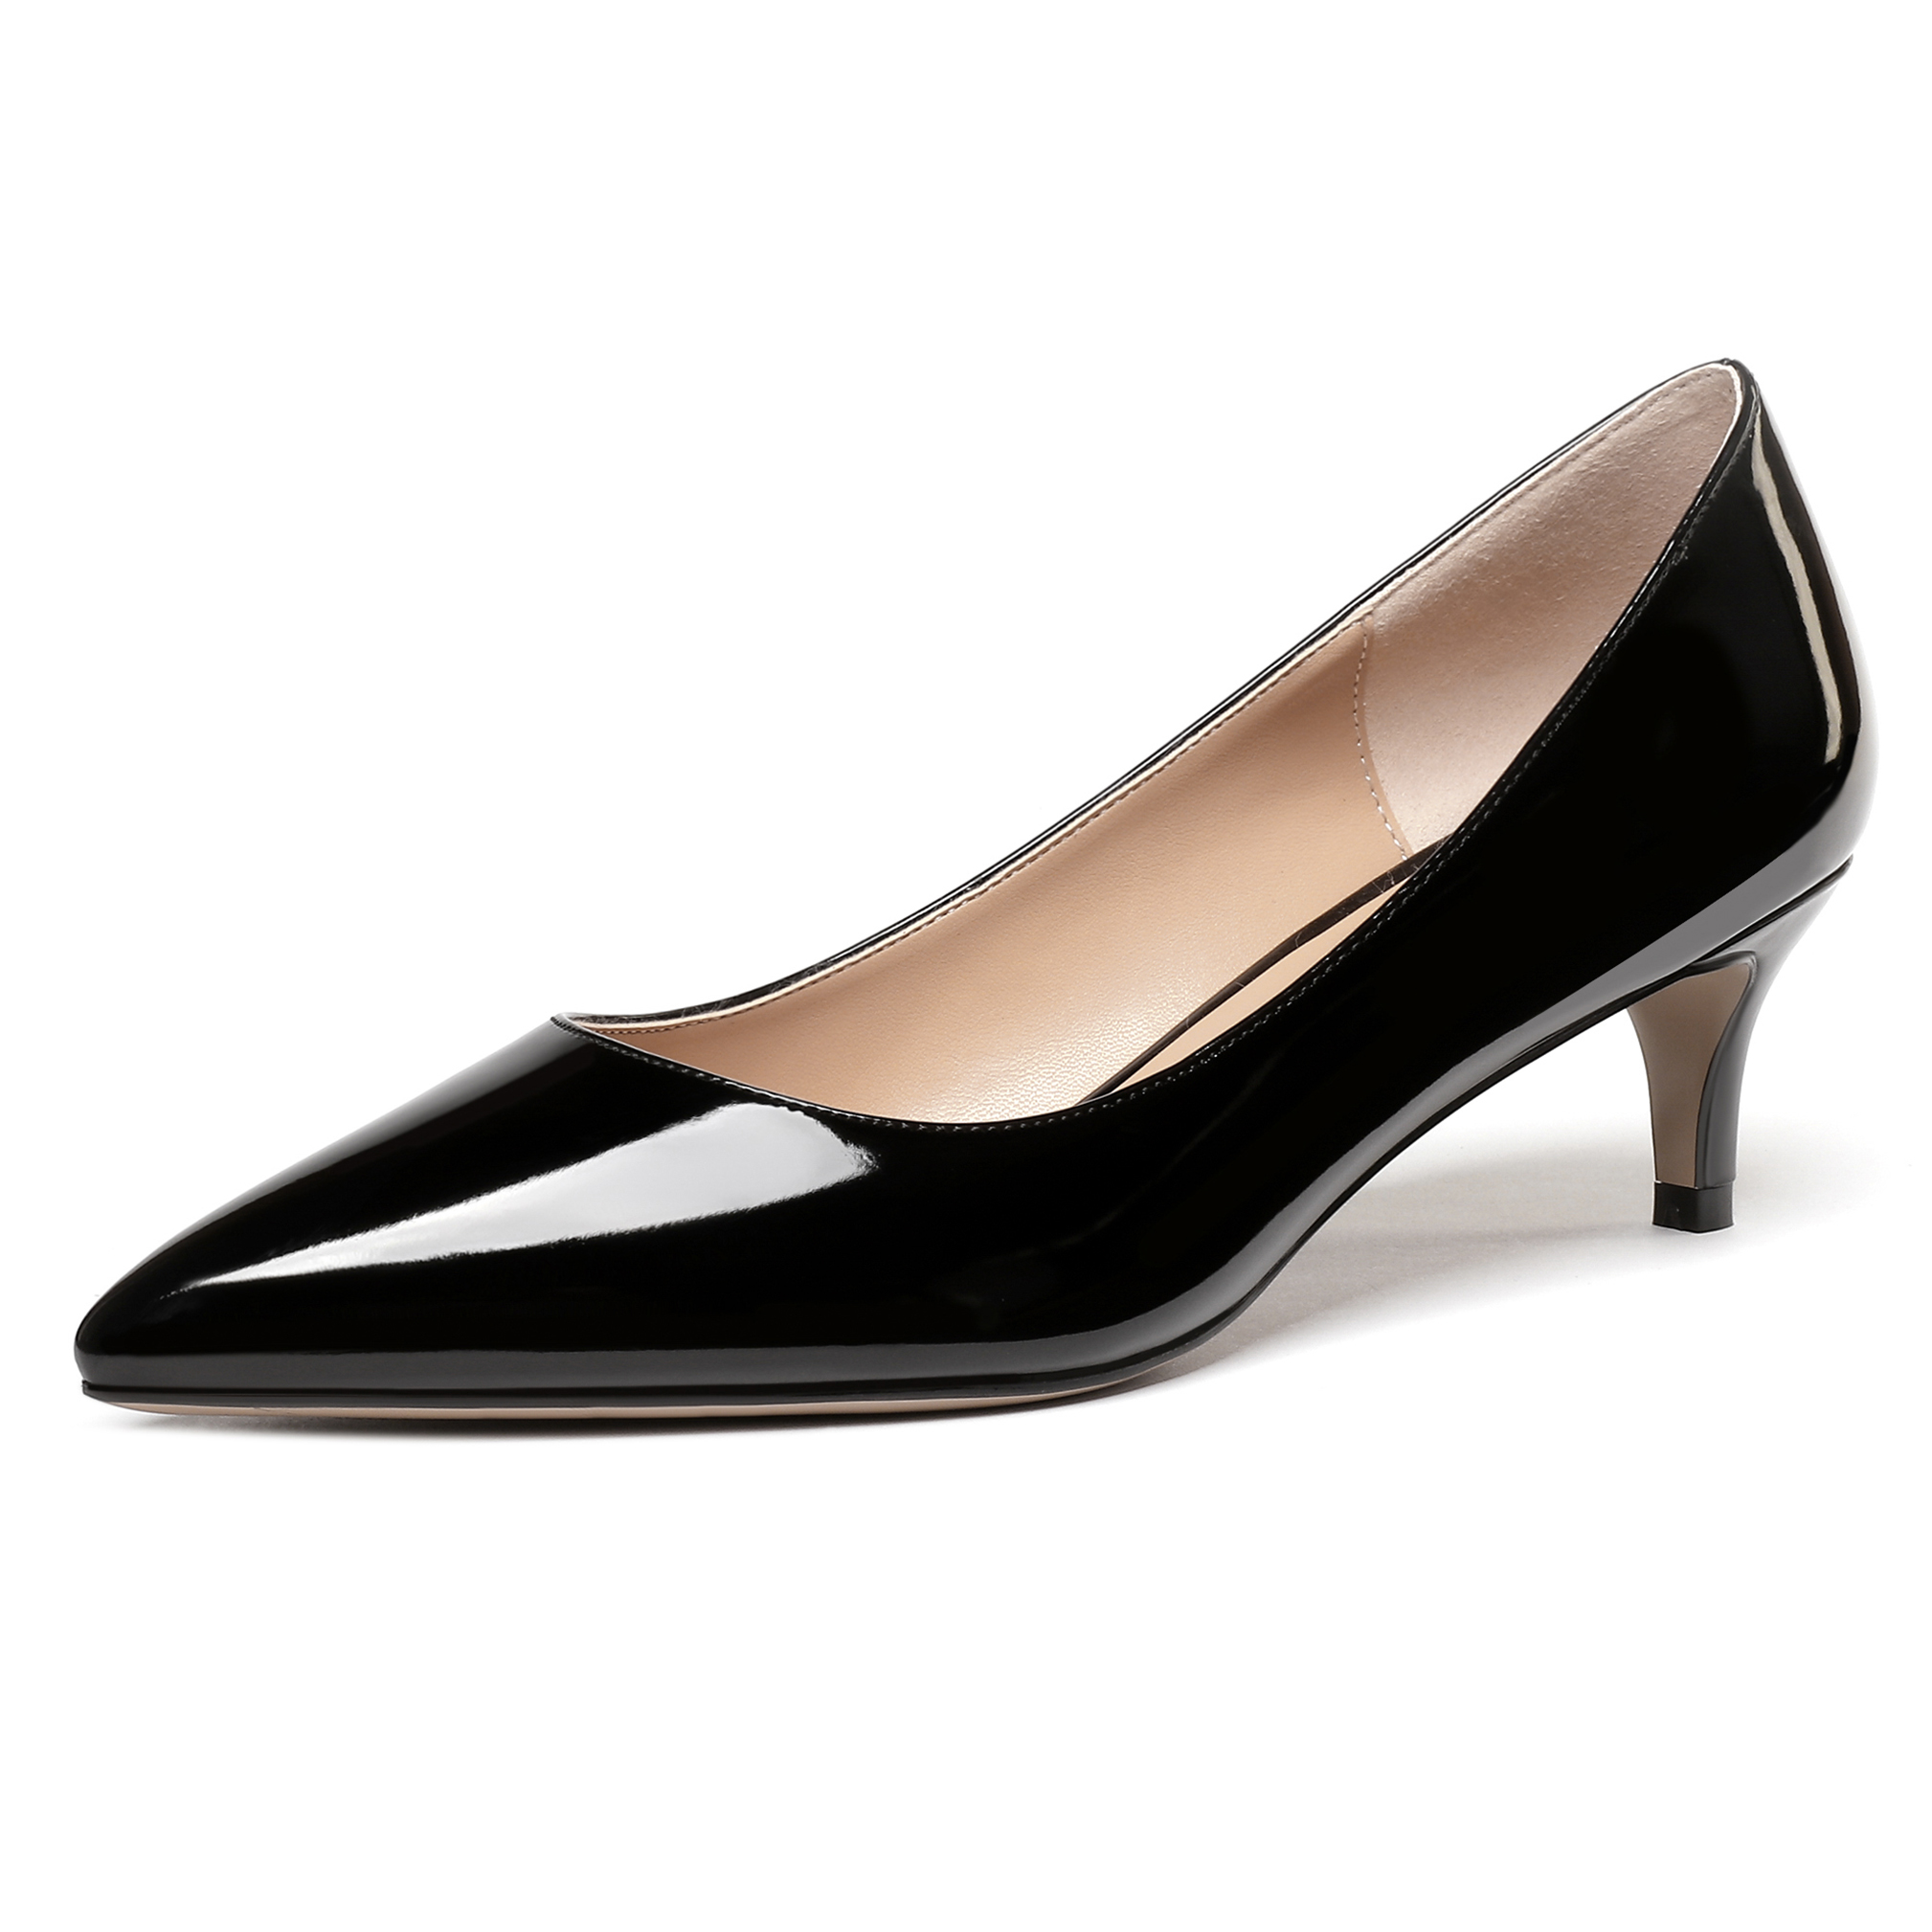 Grecia Patent Pointed Toe Office Formal Pumps